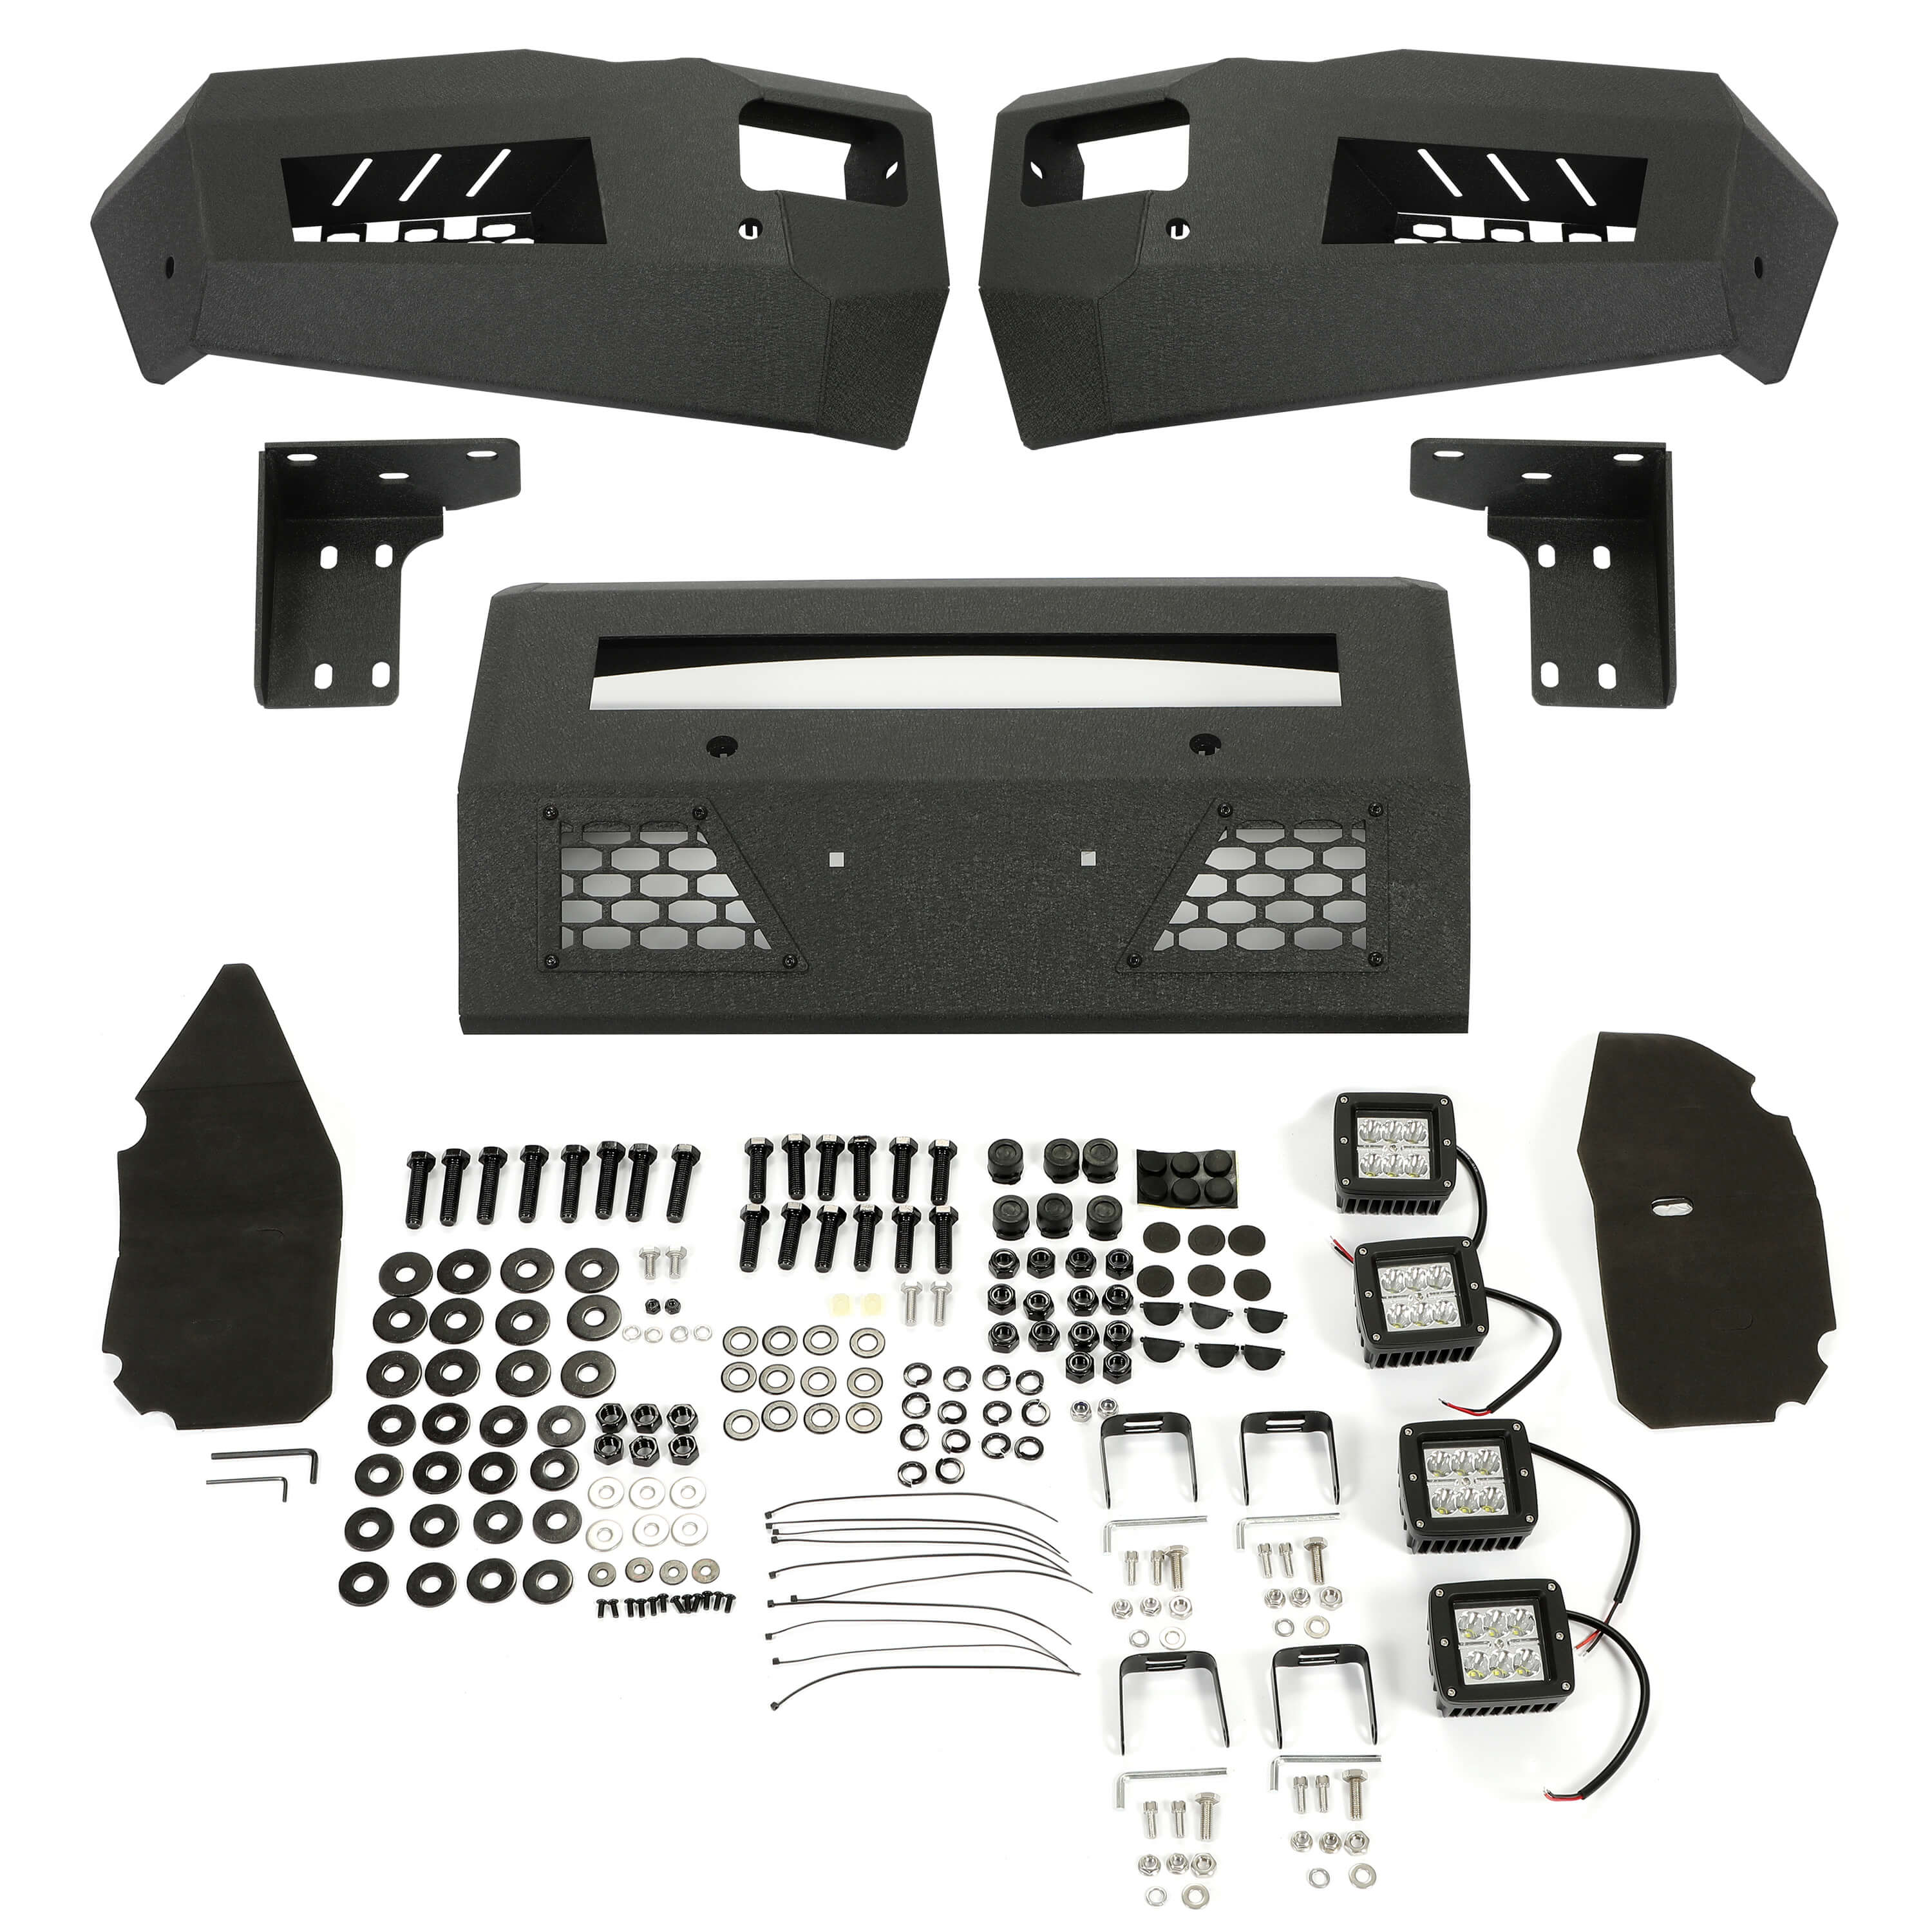 MR.GOP-Front Bumper Off-road 3-Piece Modular Compatible with 2010-2018 Dodge Ram 2500 3500 with 4 LED Lights Powder Coated Steel Textured Black